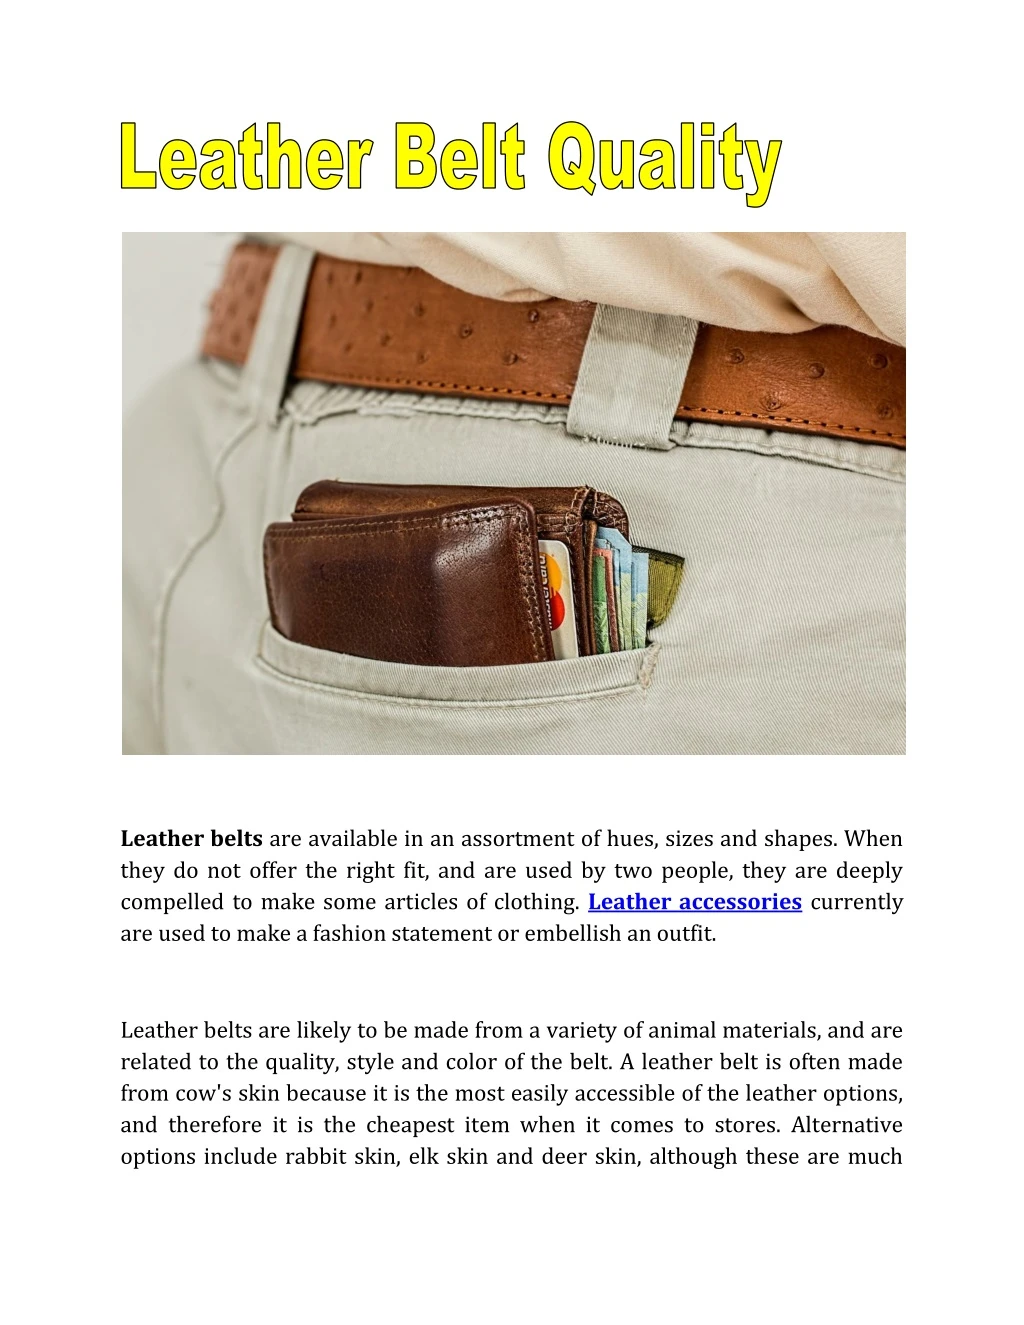 leather belts are available in an assortment